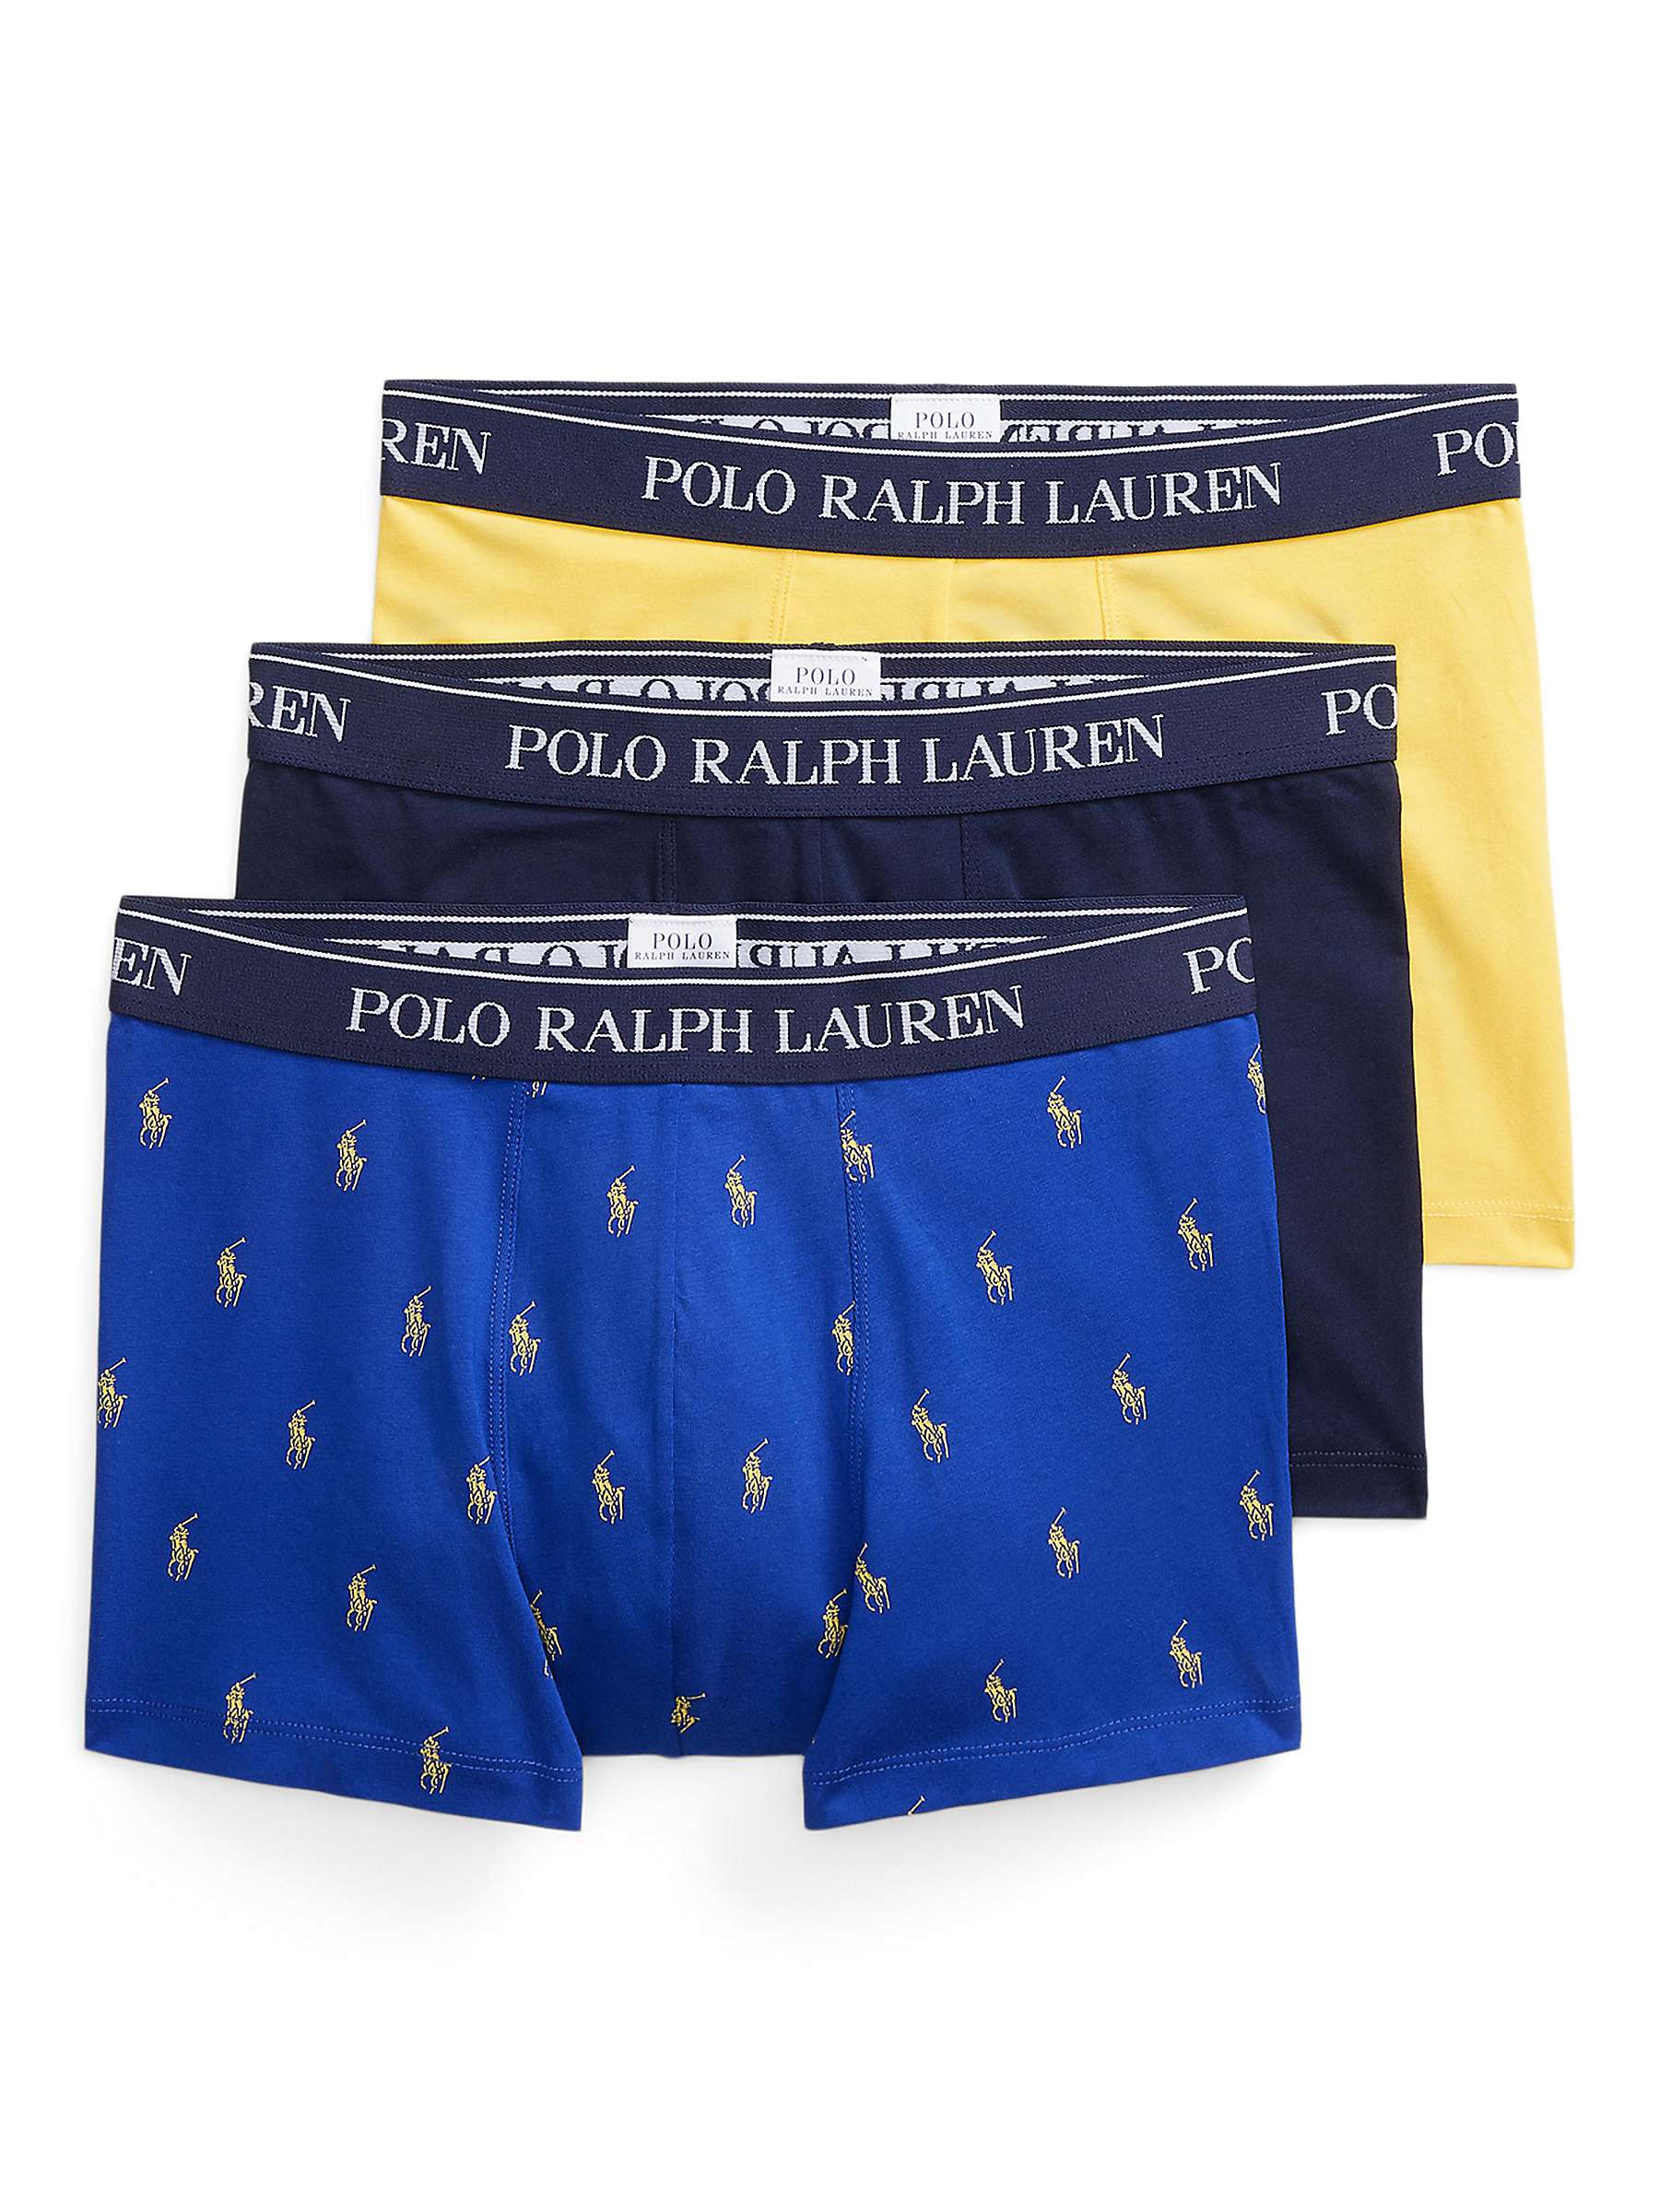 Buy Ralph Lauren Classic Stretch Cotton Trunks, Pack of 3, Multi Online at johnlewis.com